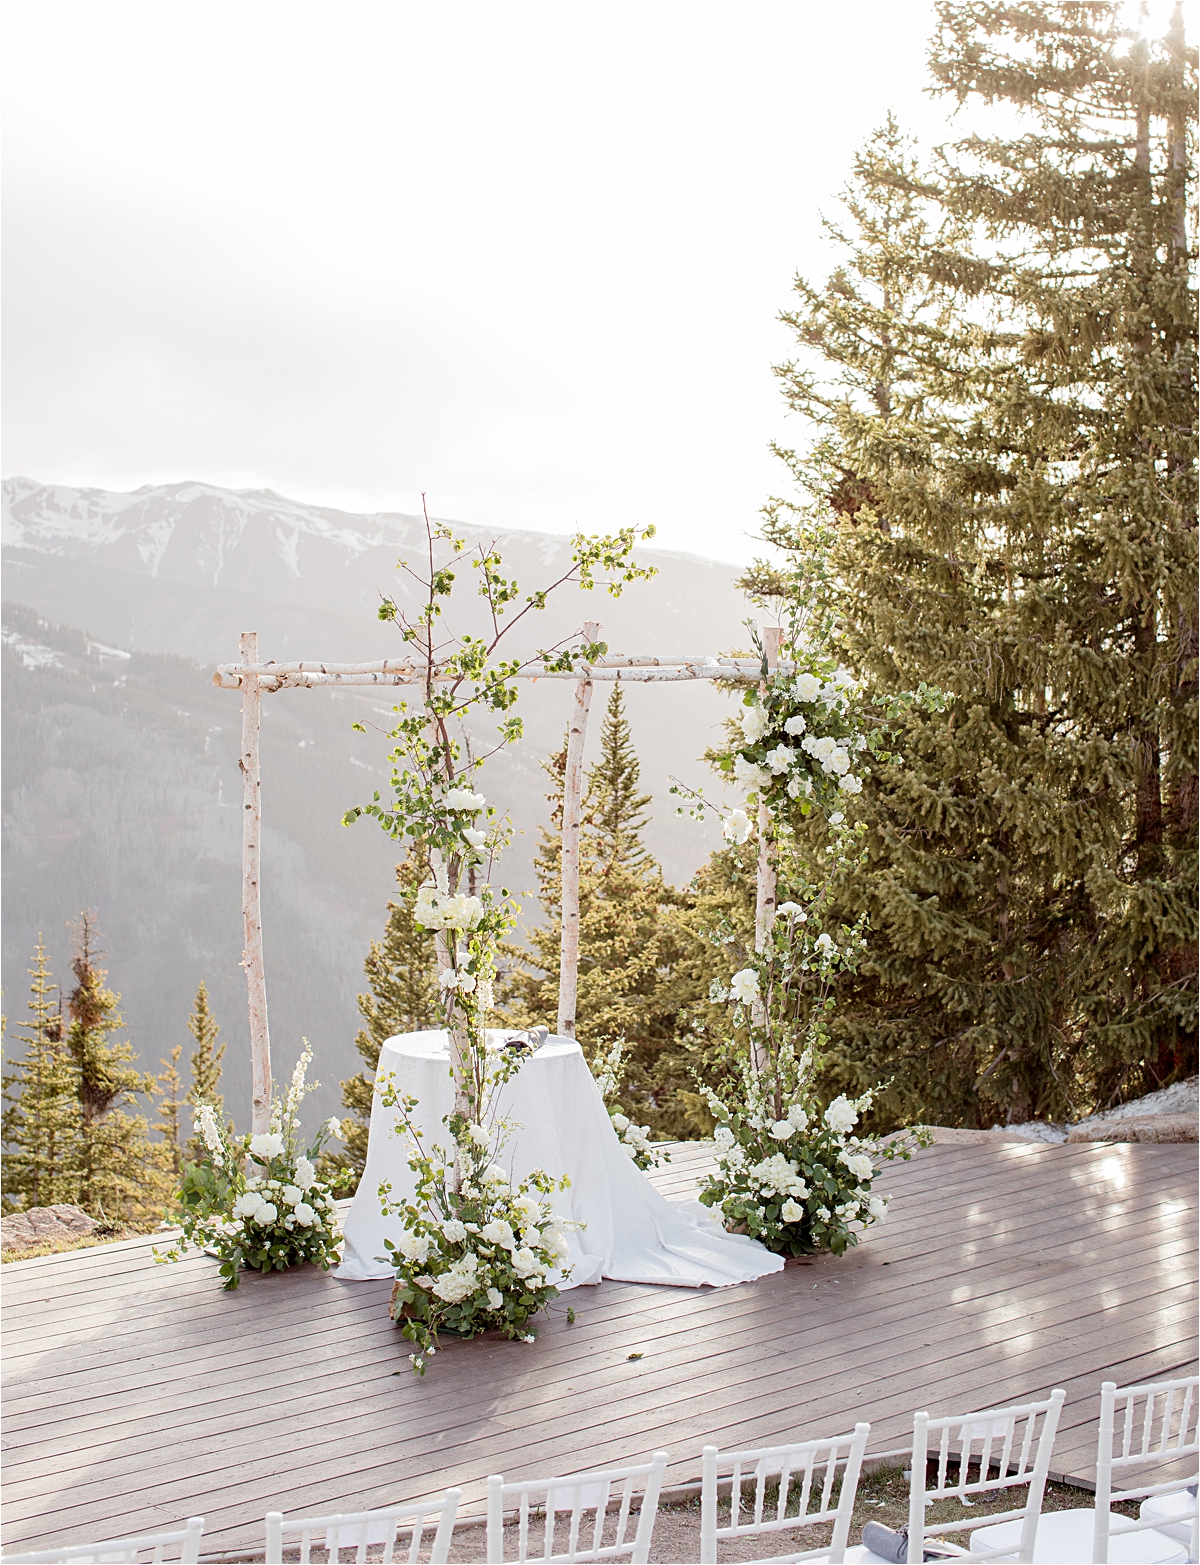 Ceremony location at the Aspen Mountain Little Nell Wedding Deck mountain views